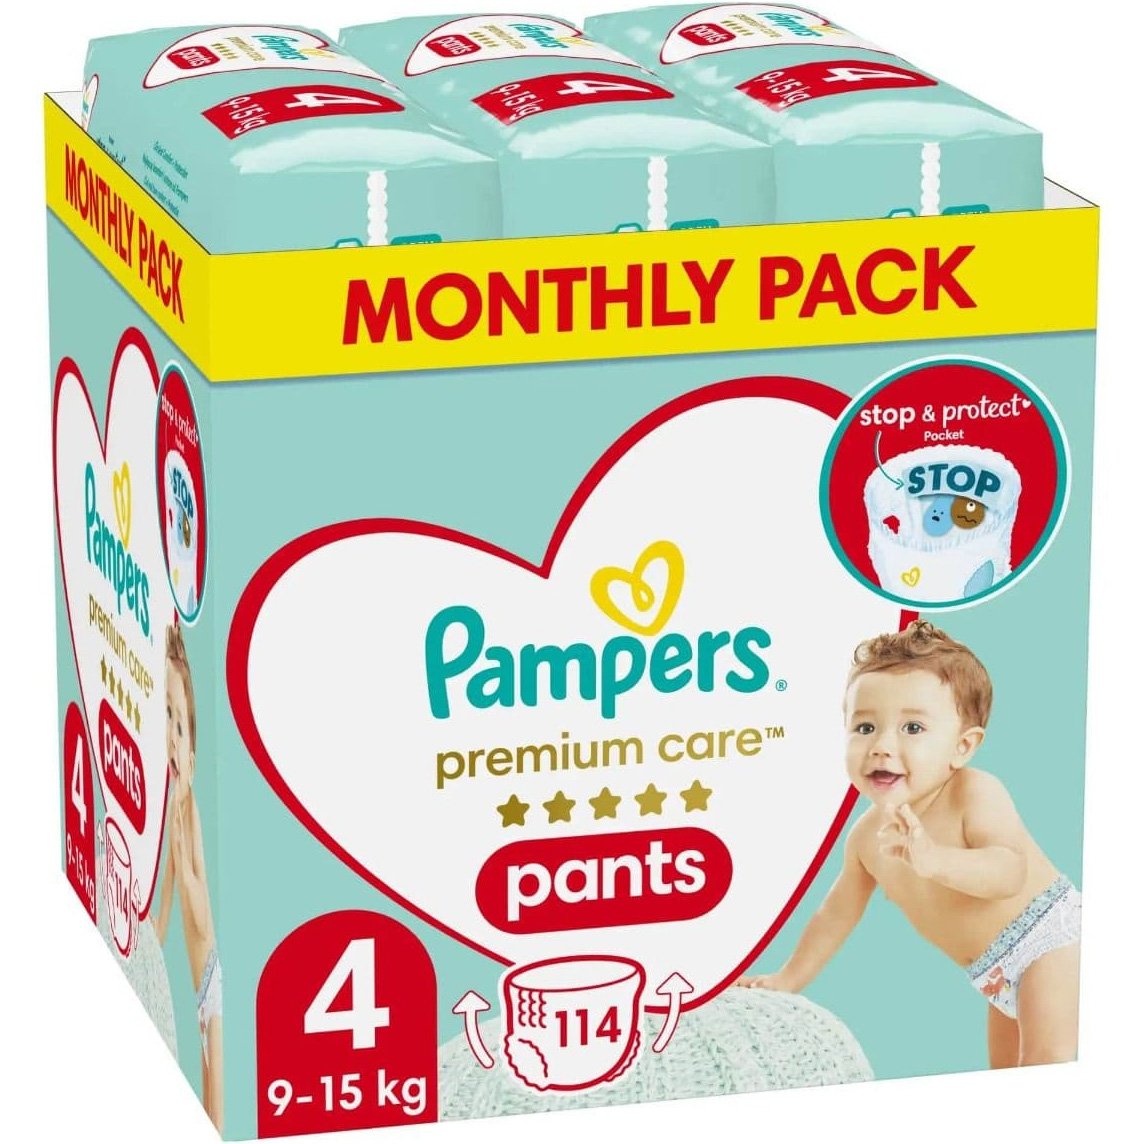 Pampers Premium Care Pants Monthly Pack No4 (9-15kg) 114 πάνες 46697